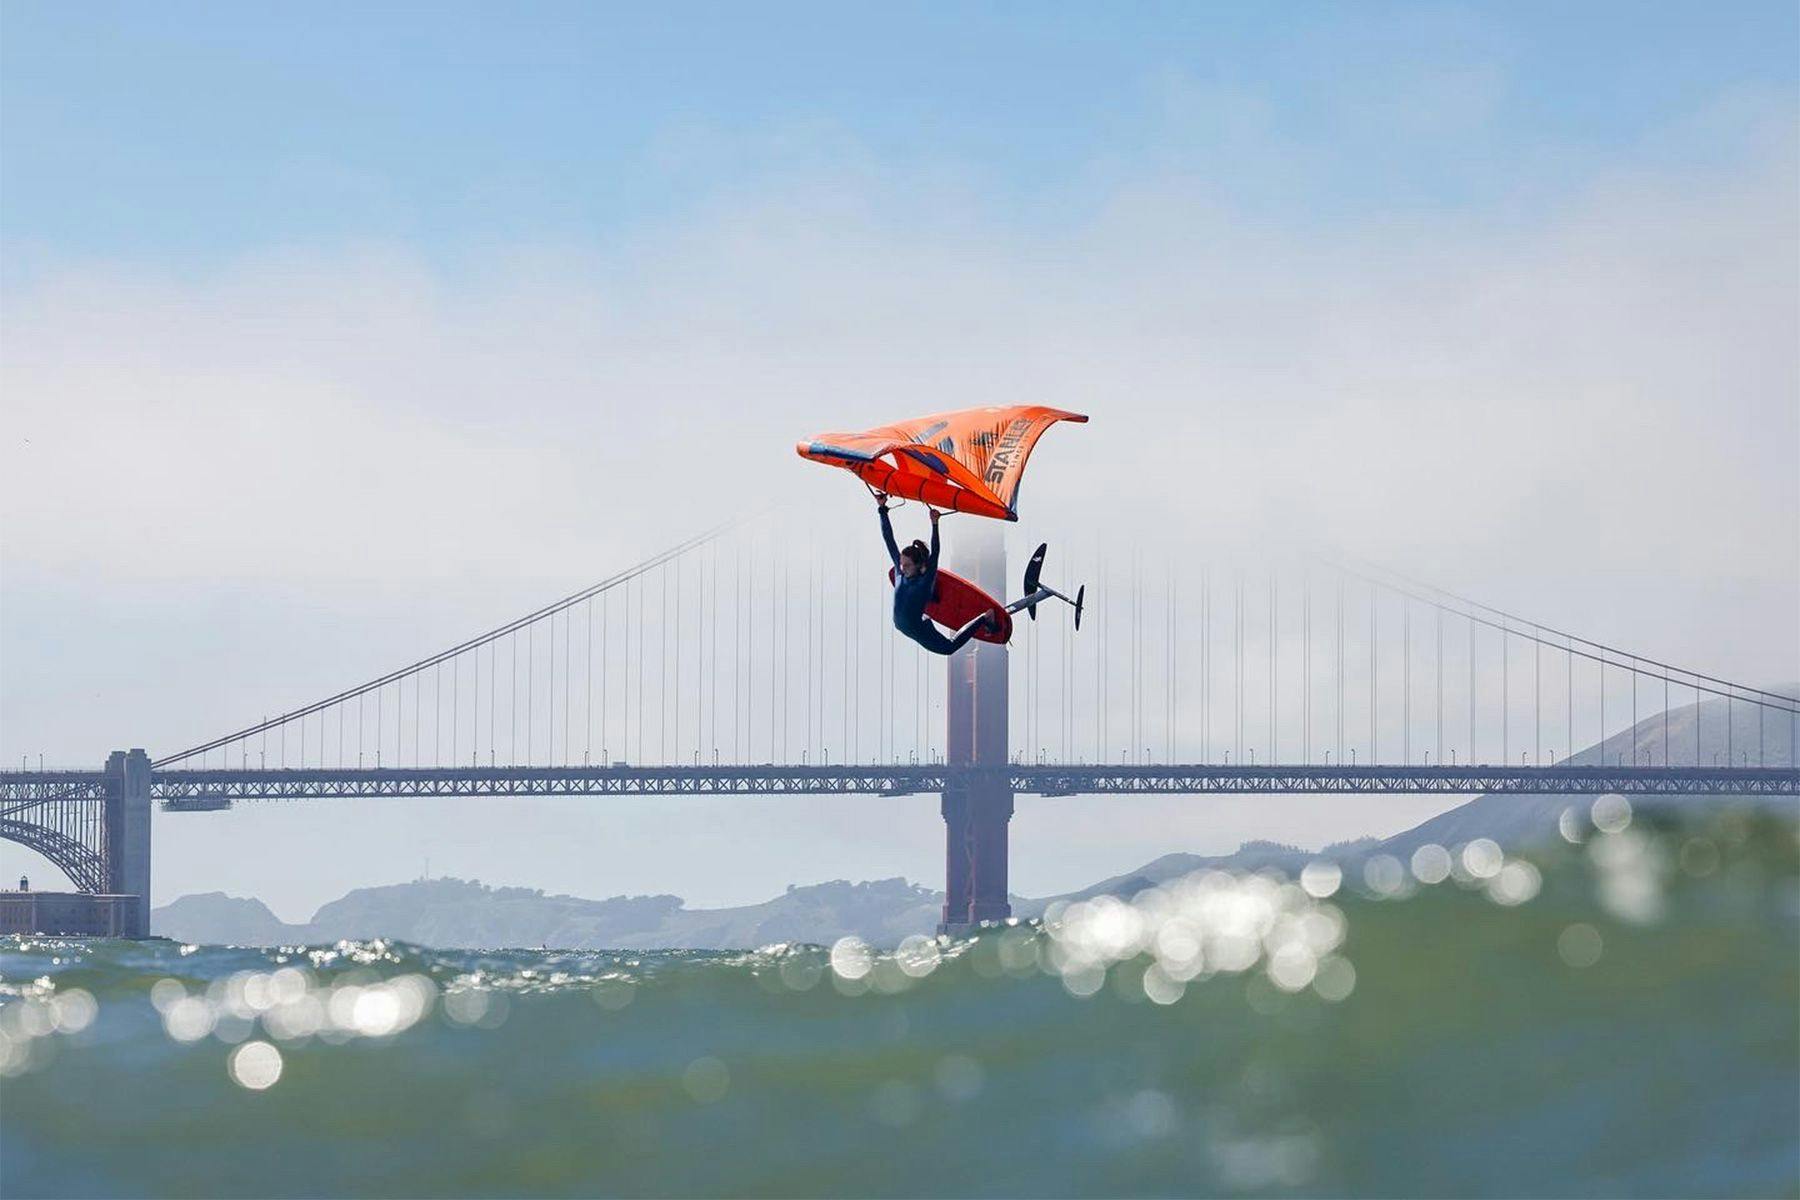 wing foiler in front of the golden gate bridge in san francisco by ana catarina